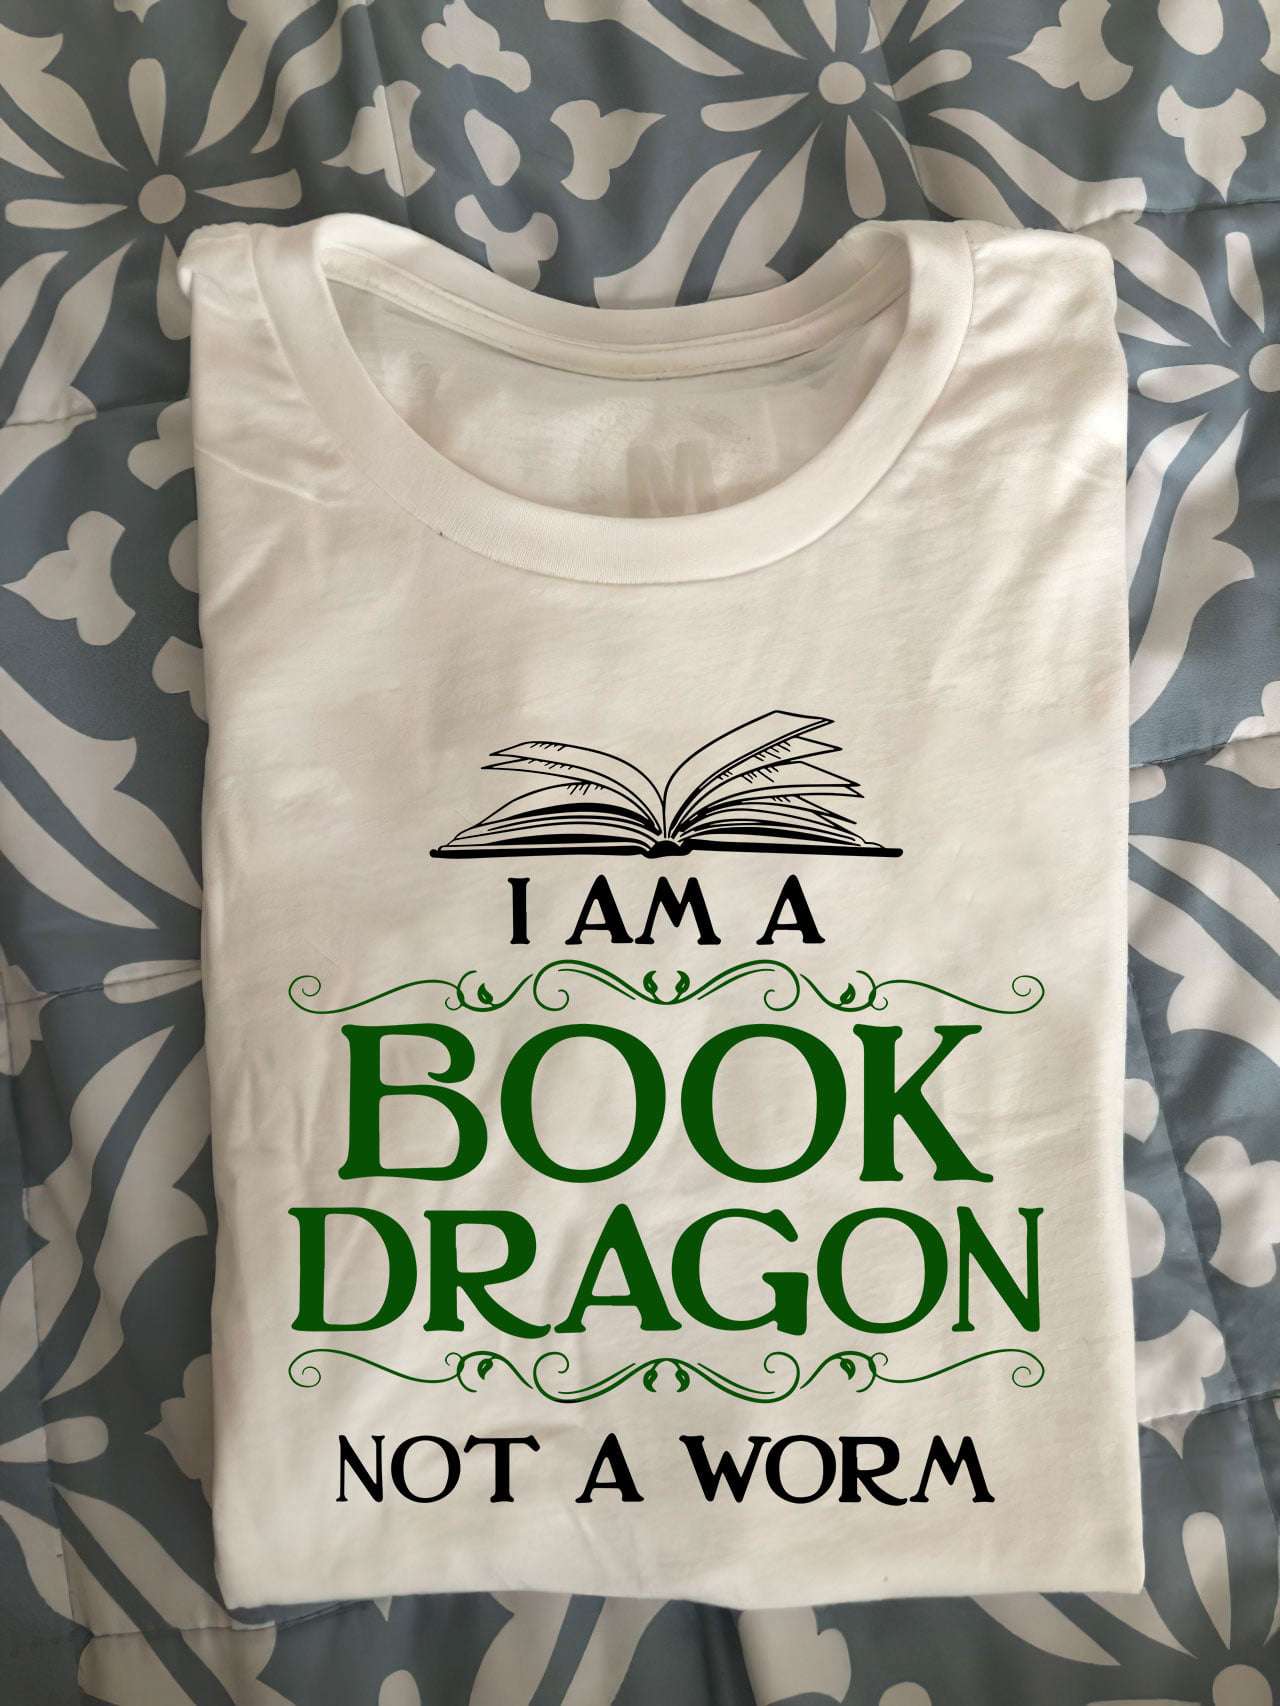 I am a book dragon not a worm - Gift for bookaholic, love reading books